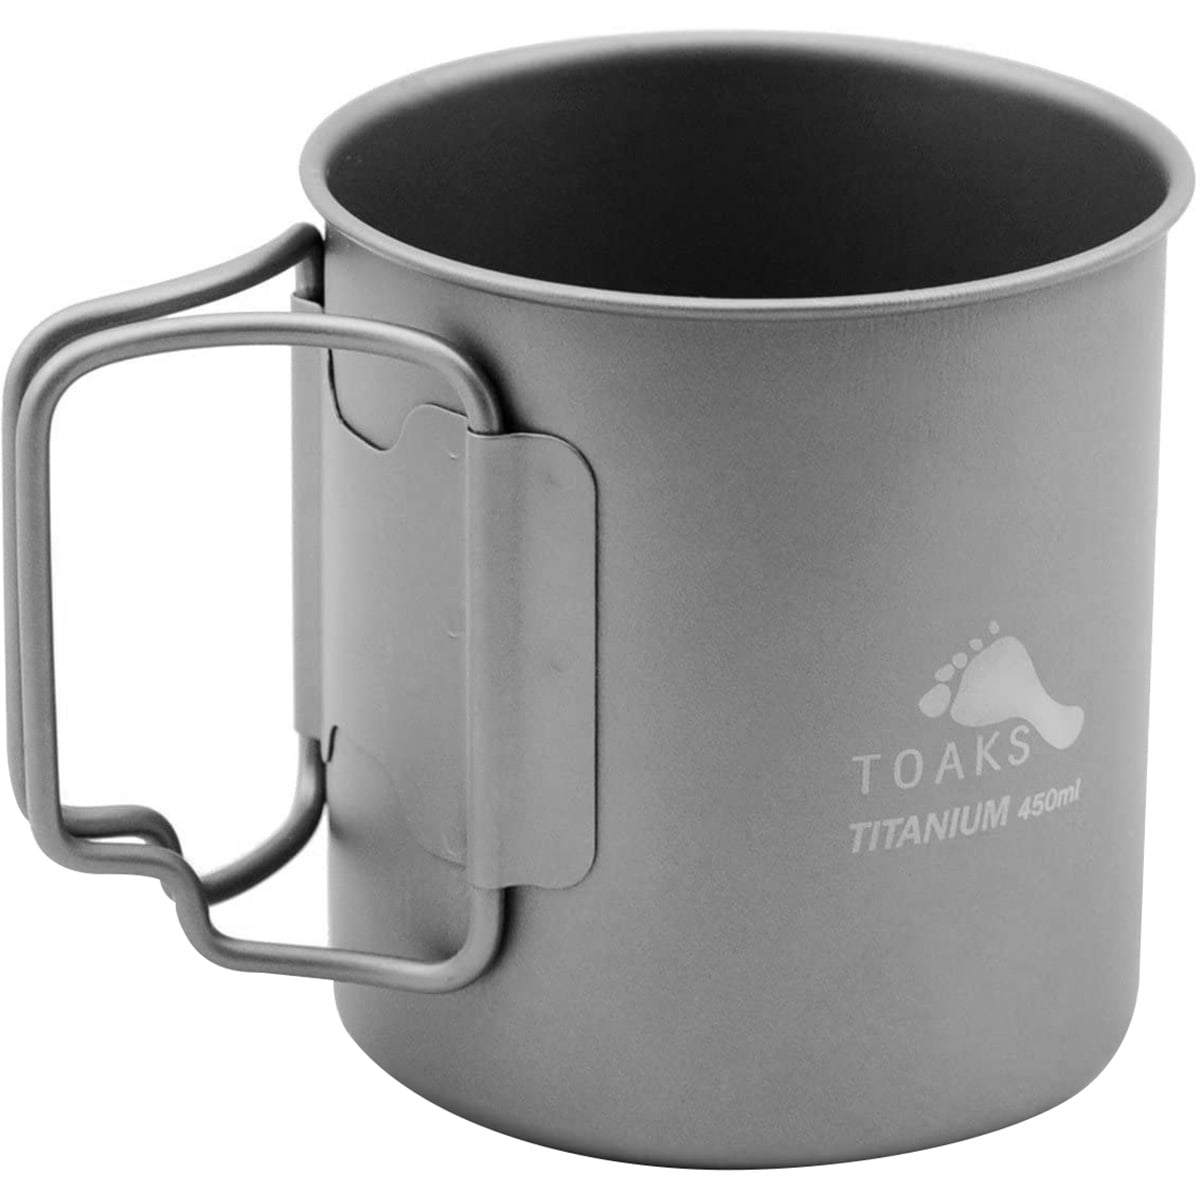 Widesea Ultralight Titanium Cup Outdoor Camping Picnic Water Cup Mug with Foldable Handle 300ml 